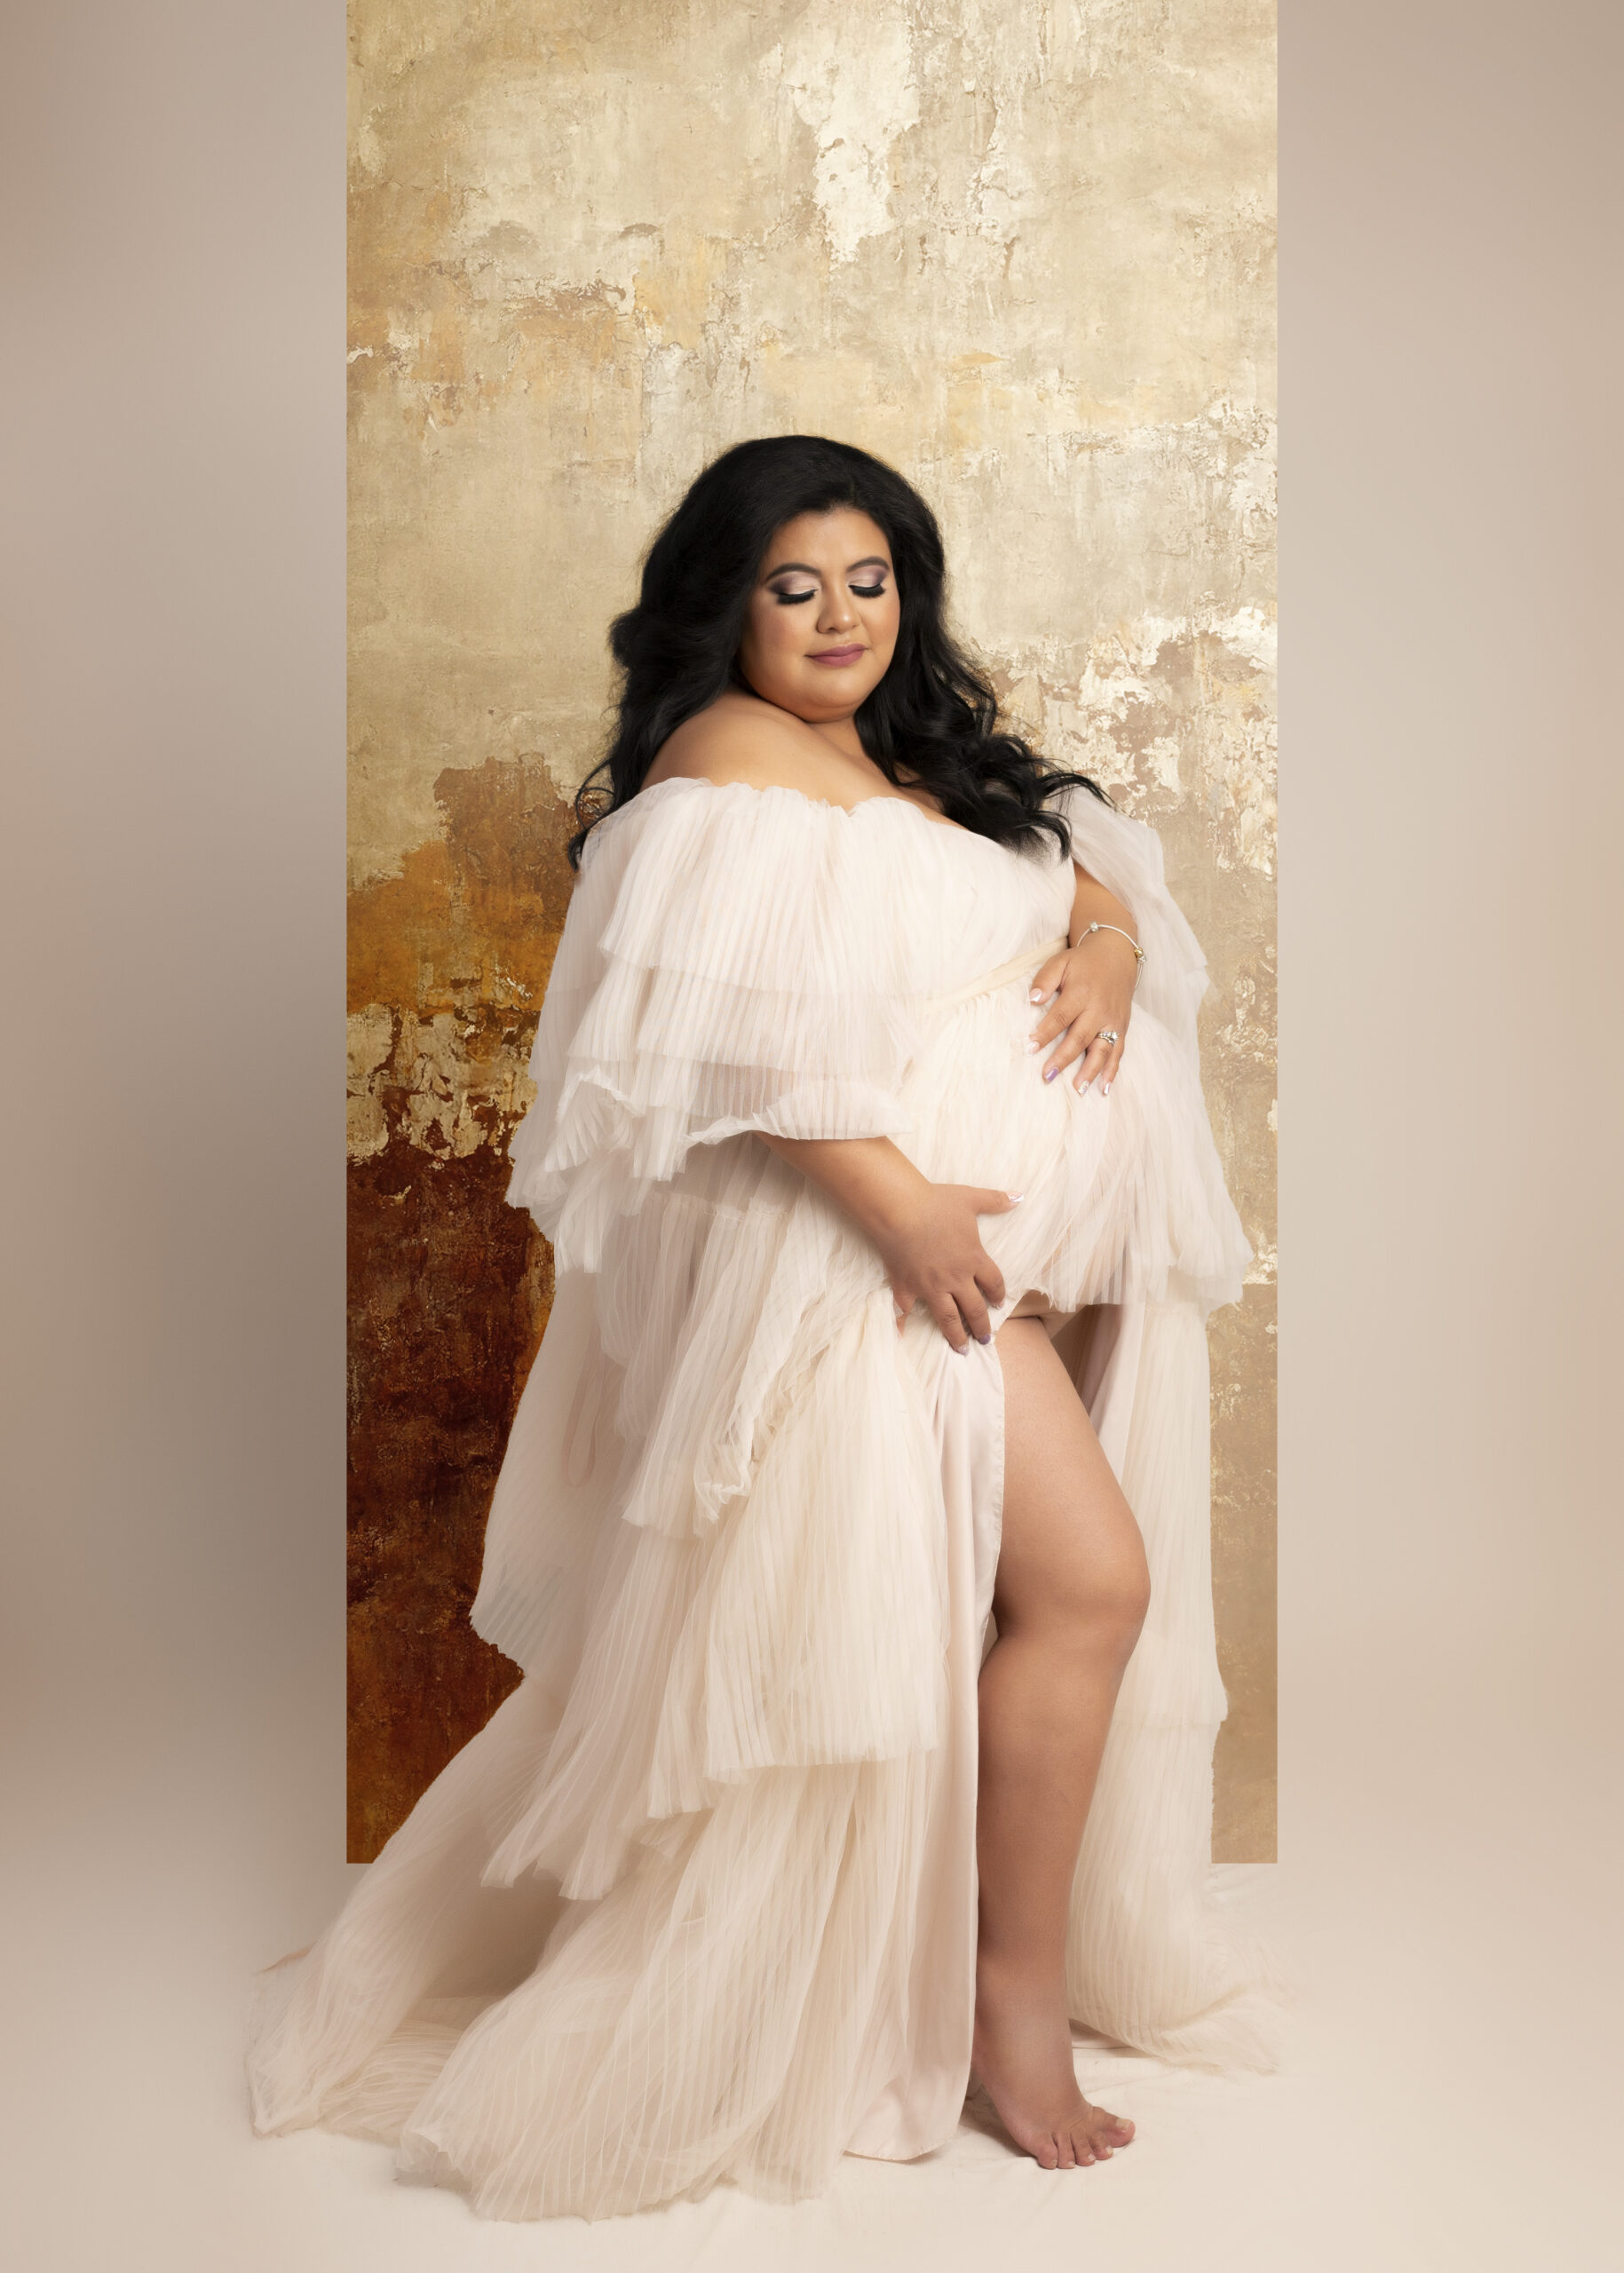 Grand rapids maternity photo session woman in long white gown with gold backdrop holding baby bump